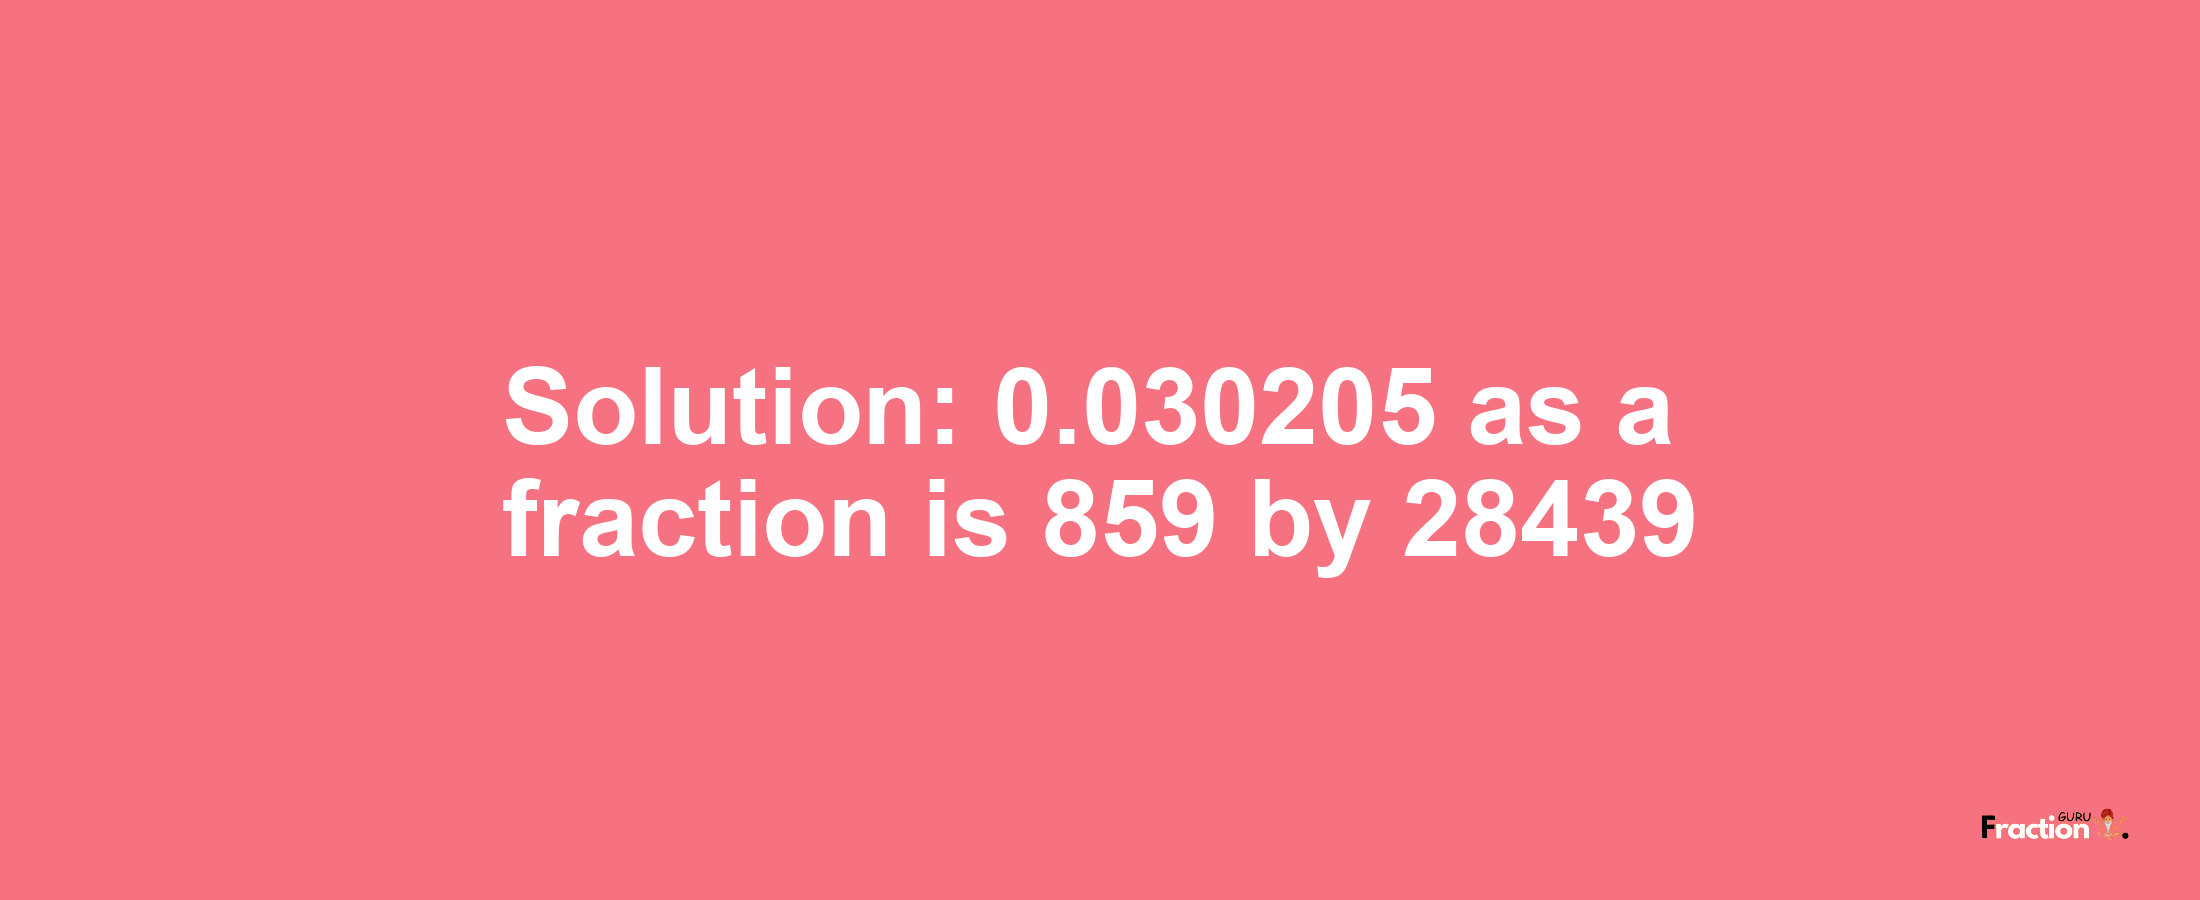 Solution:0.030205 as a fraction is 859/28439